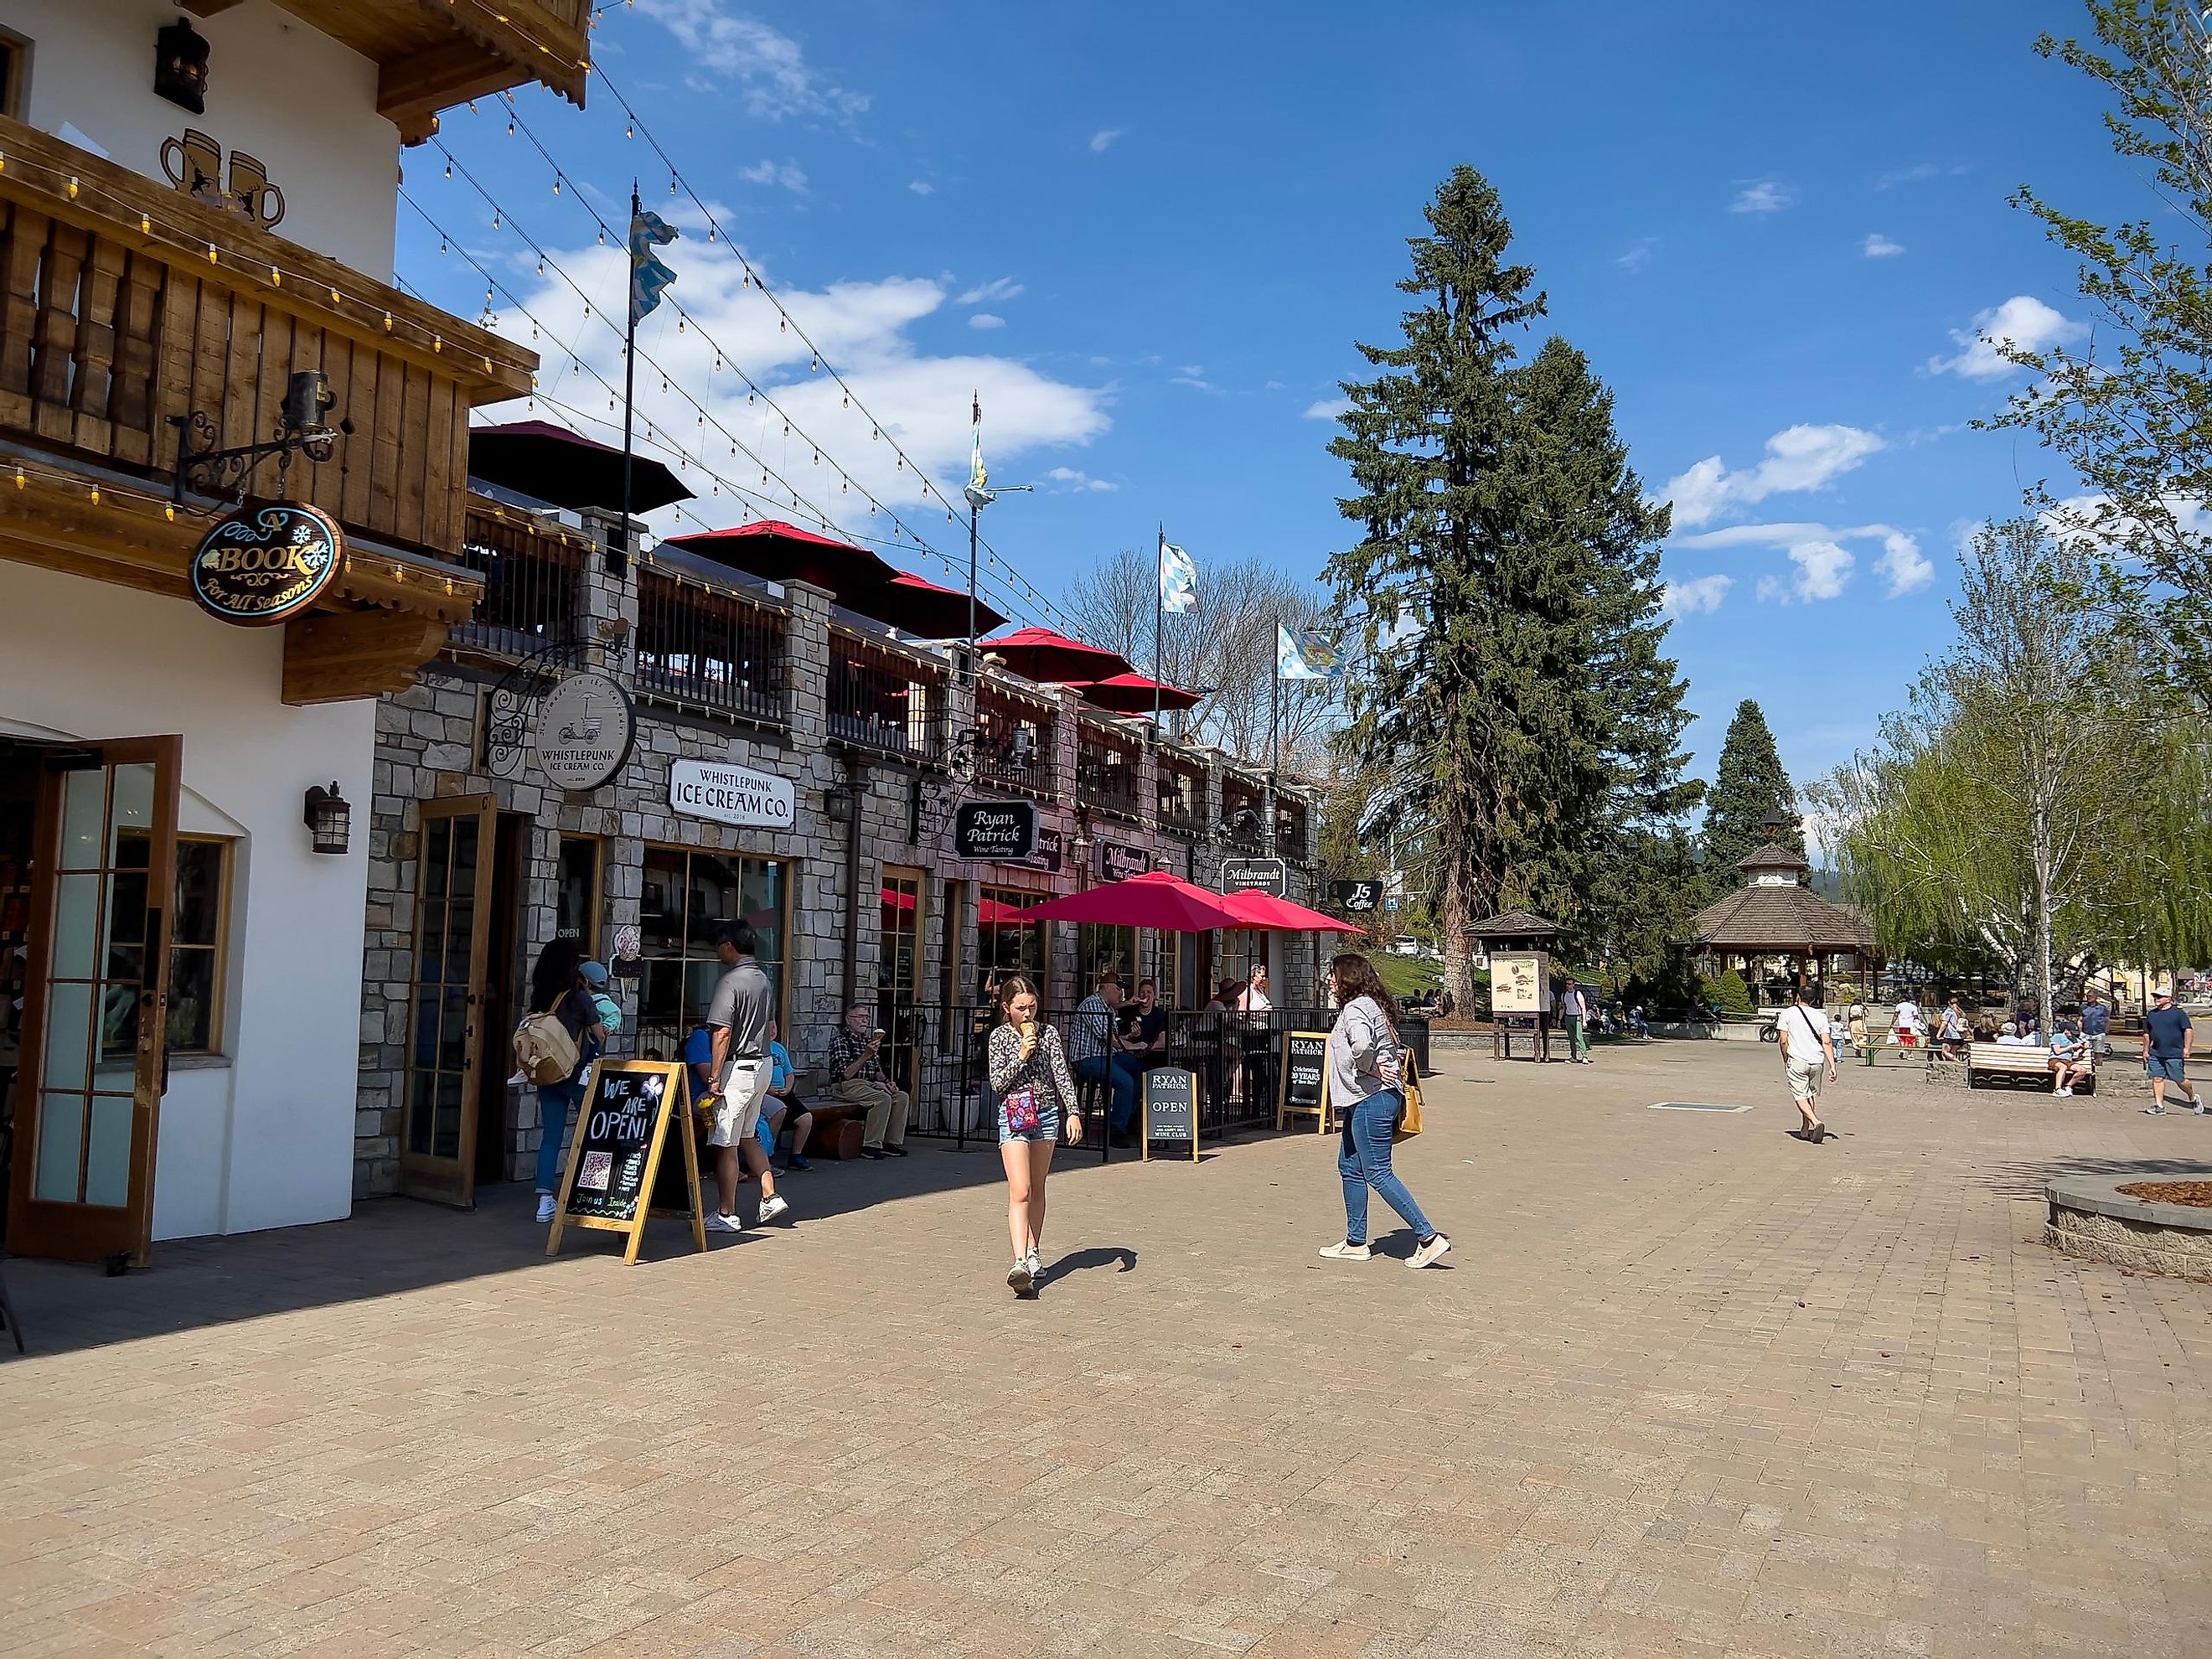 Wide view of people and dogs enjoying sunny weather in the downtown shopping district, via Colleen Michaels / Shutterstock.com